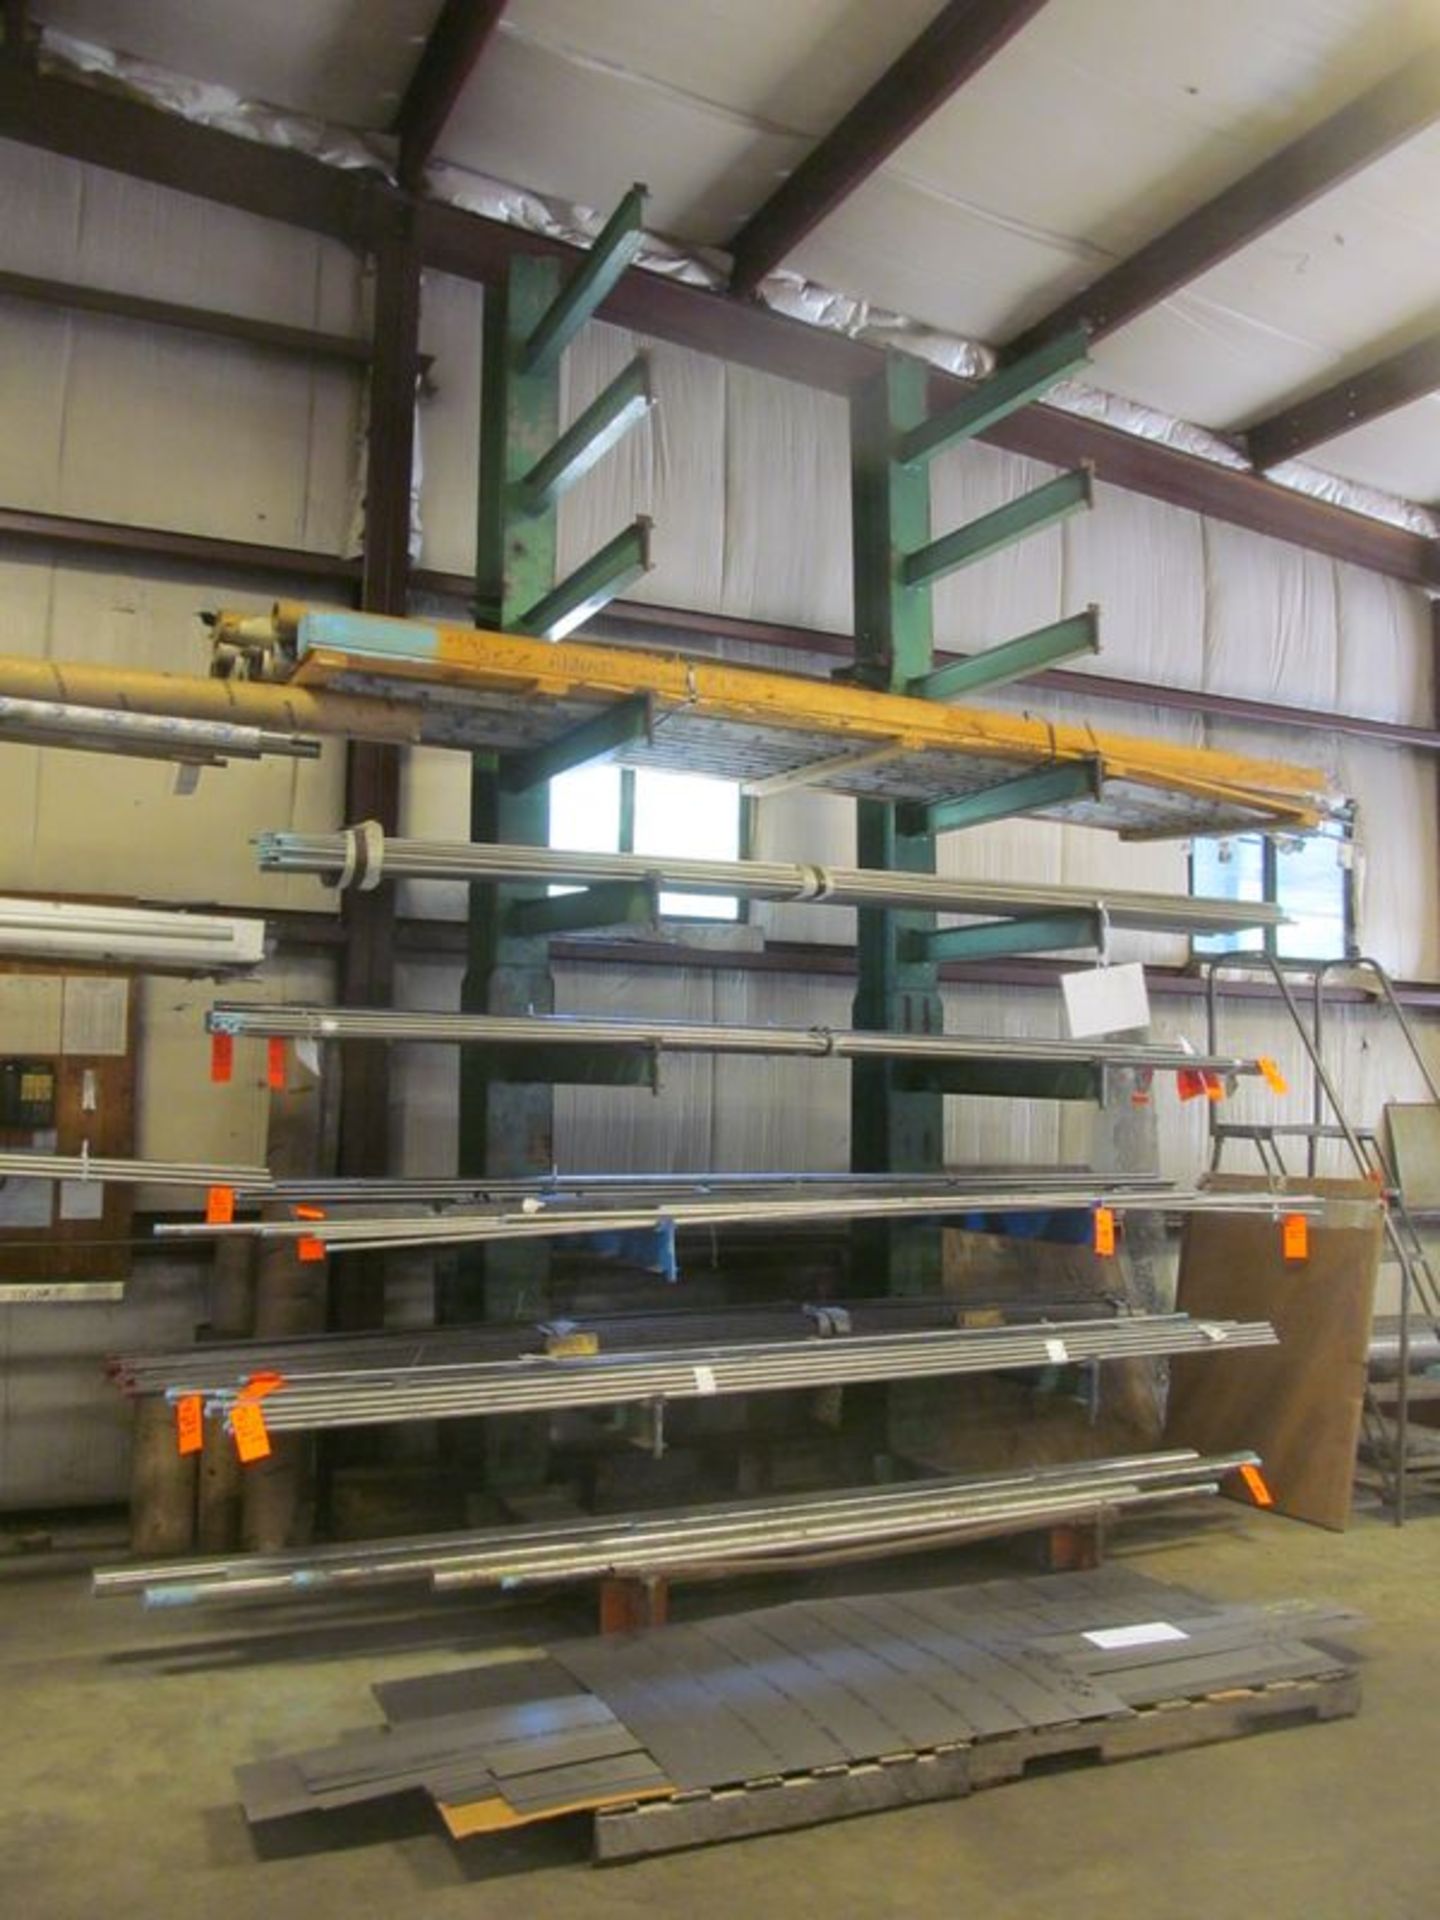 9 tier cantilevered metal stock rack, 66"w x 56" deep x 15' high, with (16) 44" arms, no contents